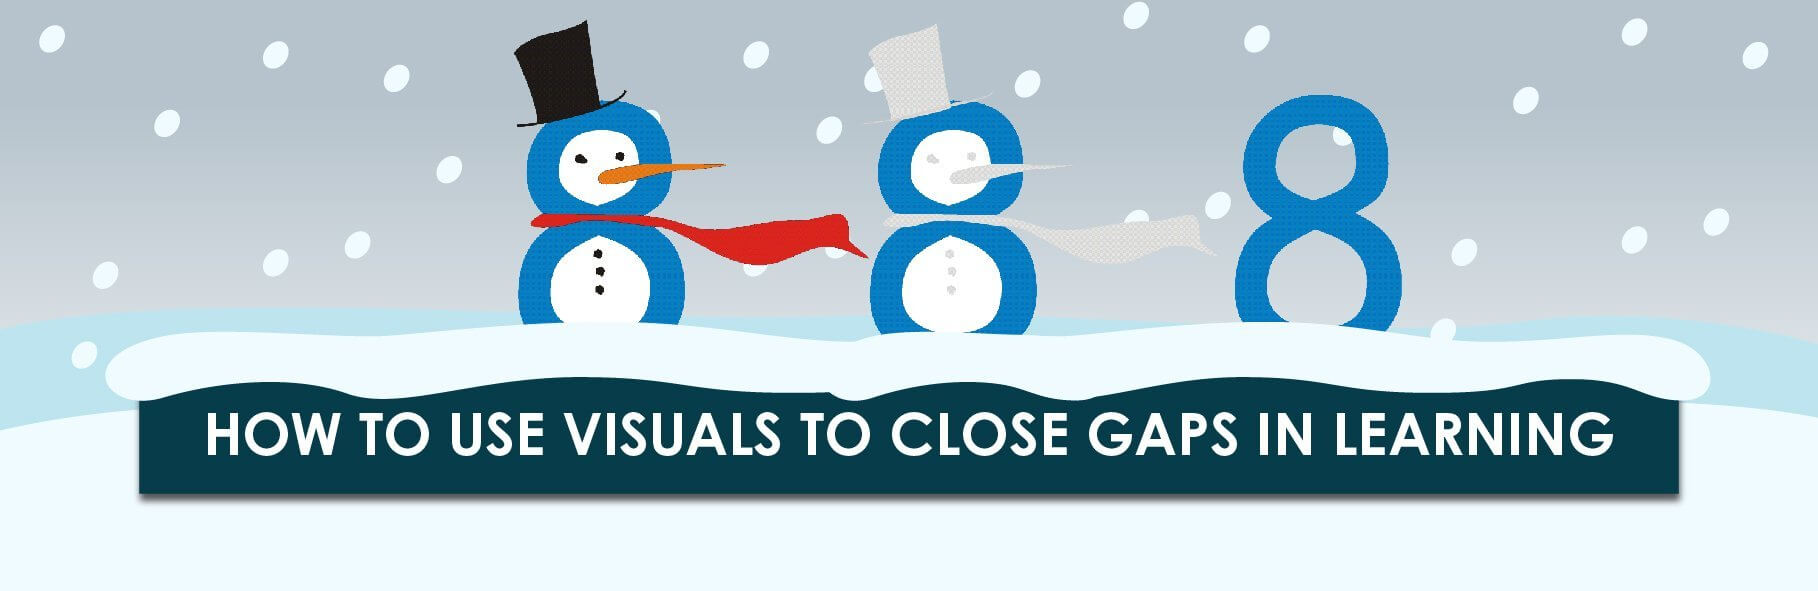 How to Use Visuals & Motions to Close Gaps in Learning